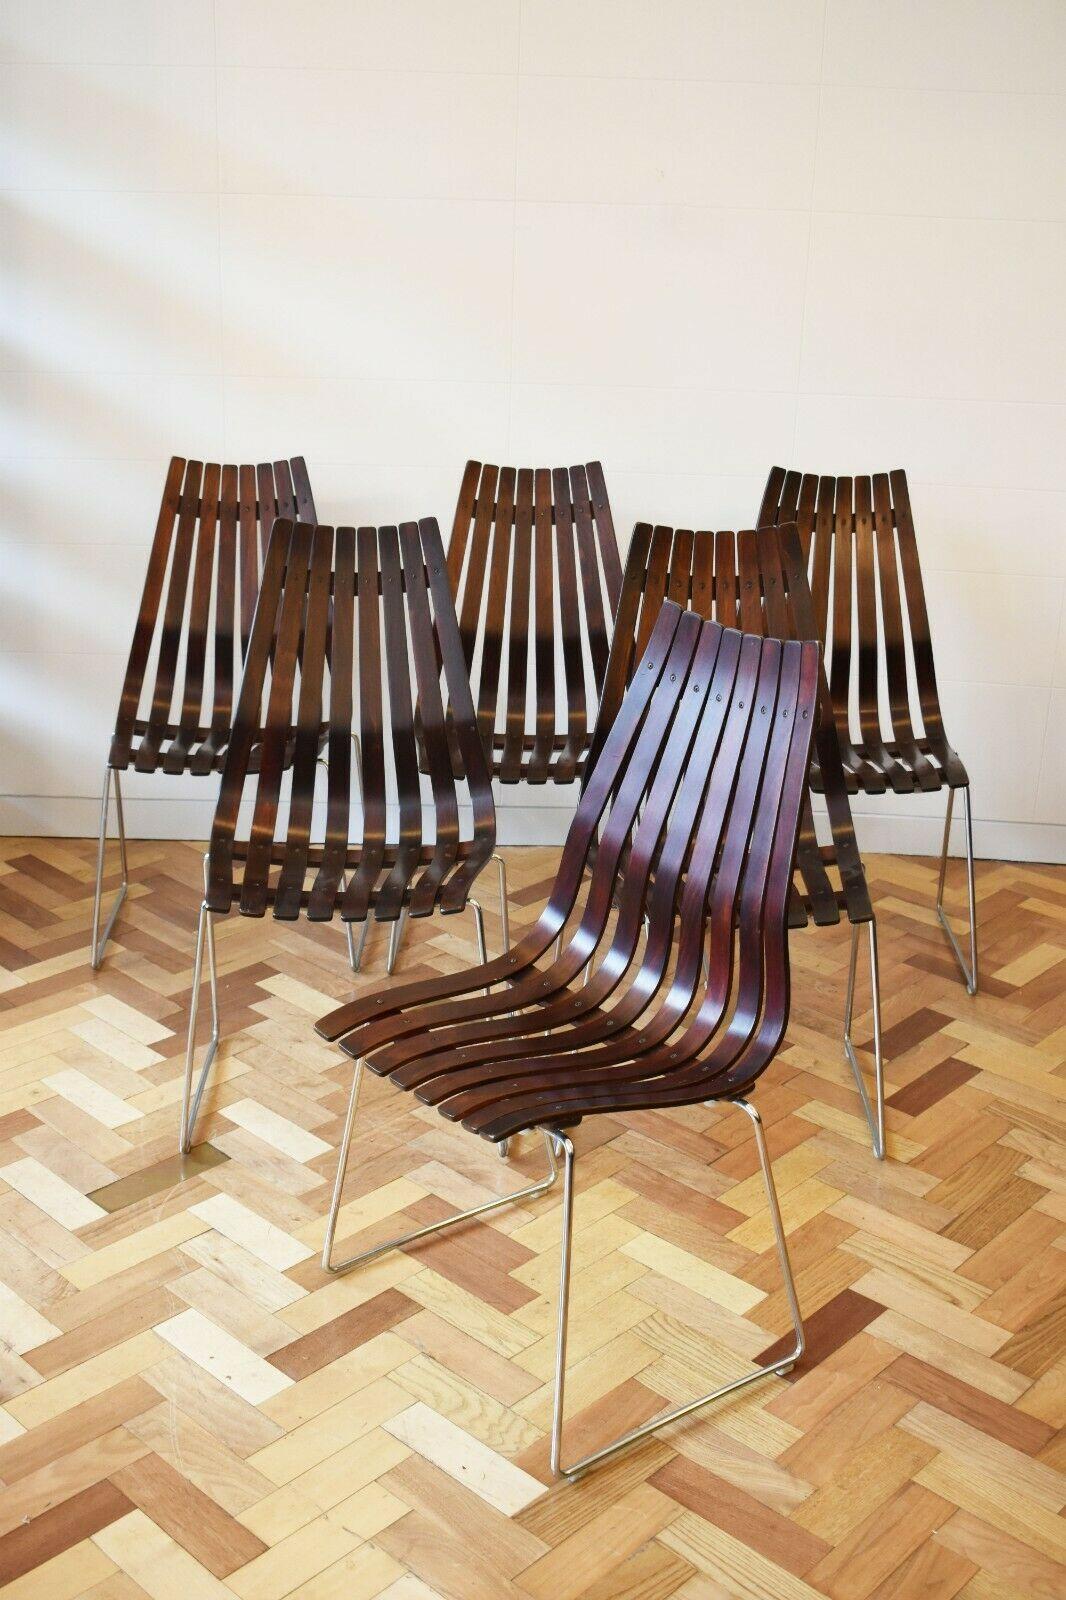 Stunning set of six 1957 high back 'Scandia' dining chairs designed by Hans Brattrud for Hove Møbler.
These gorgeous Norwegian chairs feature broadening backs comprised of laminated wood slats. They are raised by a chromed wire base with hairpin